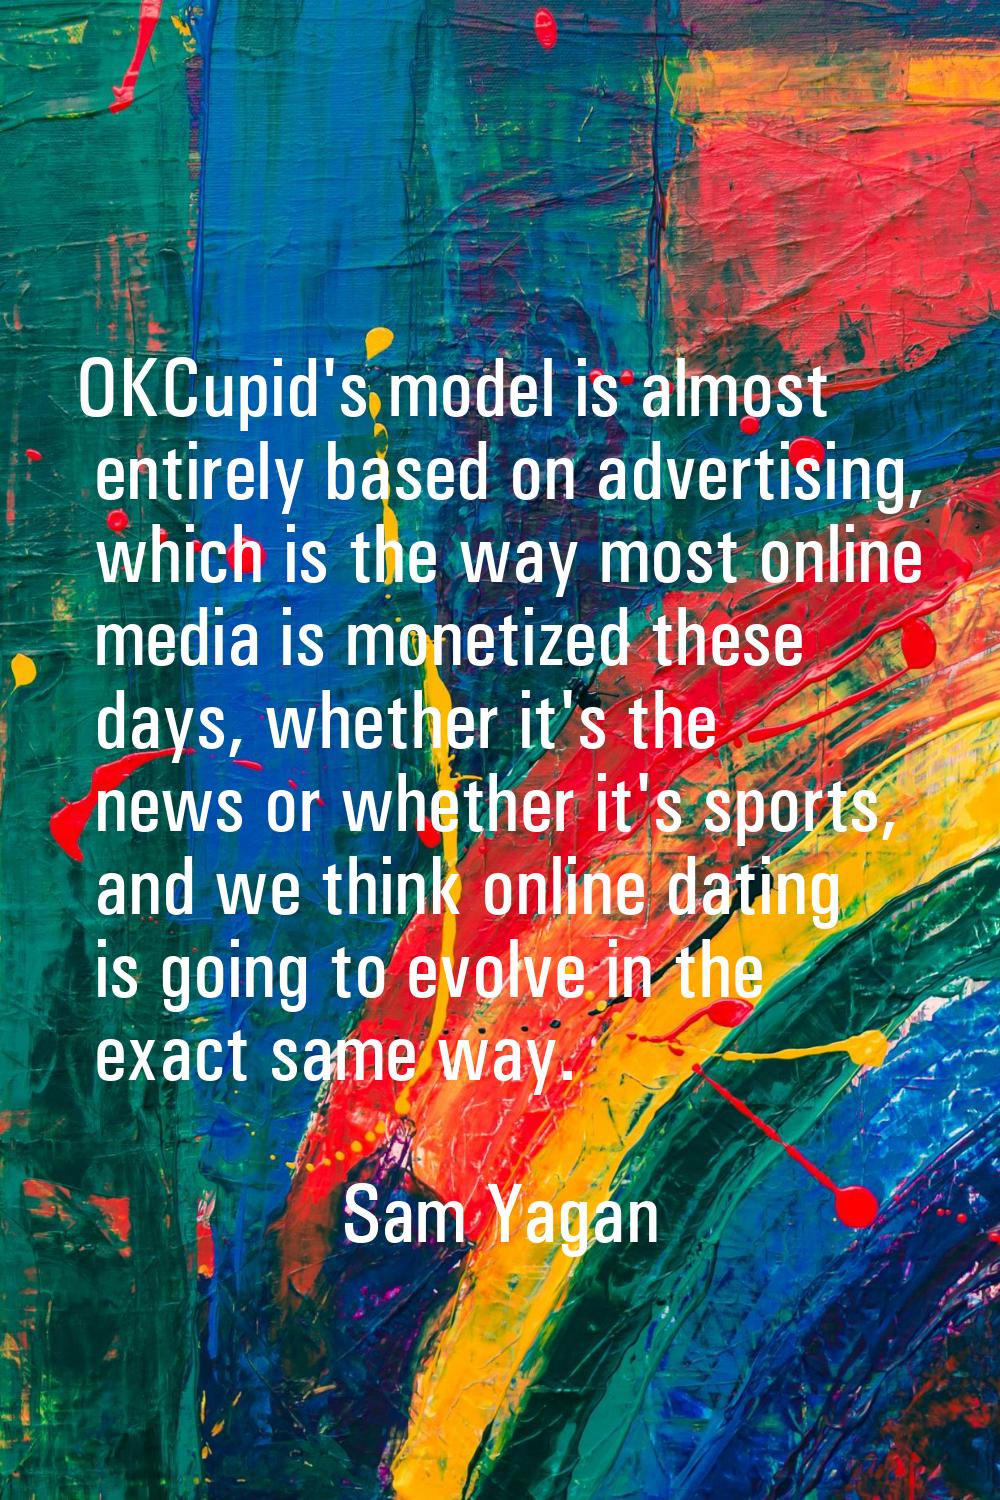 OKCupid's model is almost entirely based on advertising, which is the way most online media is mone